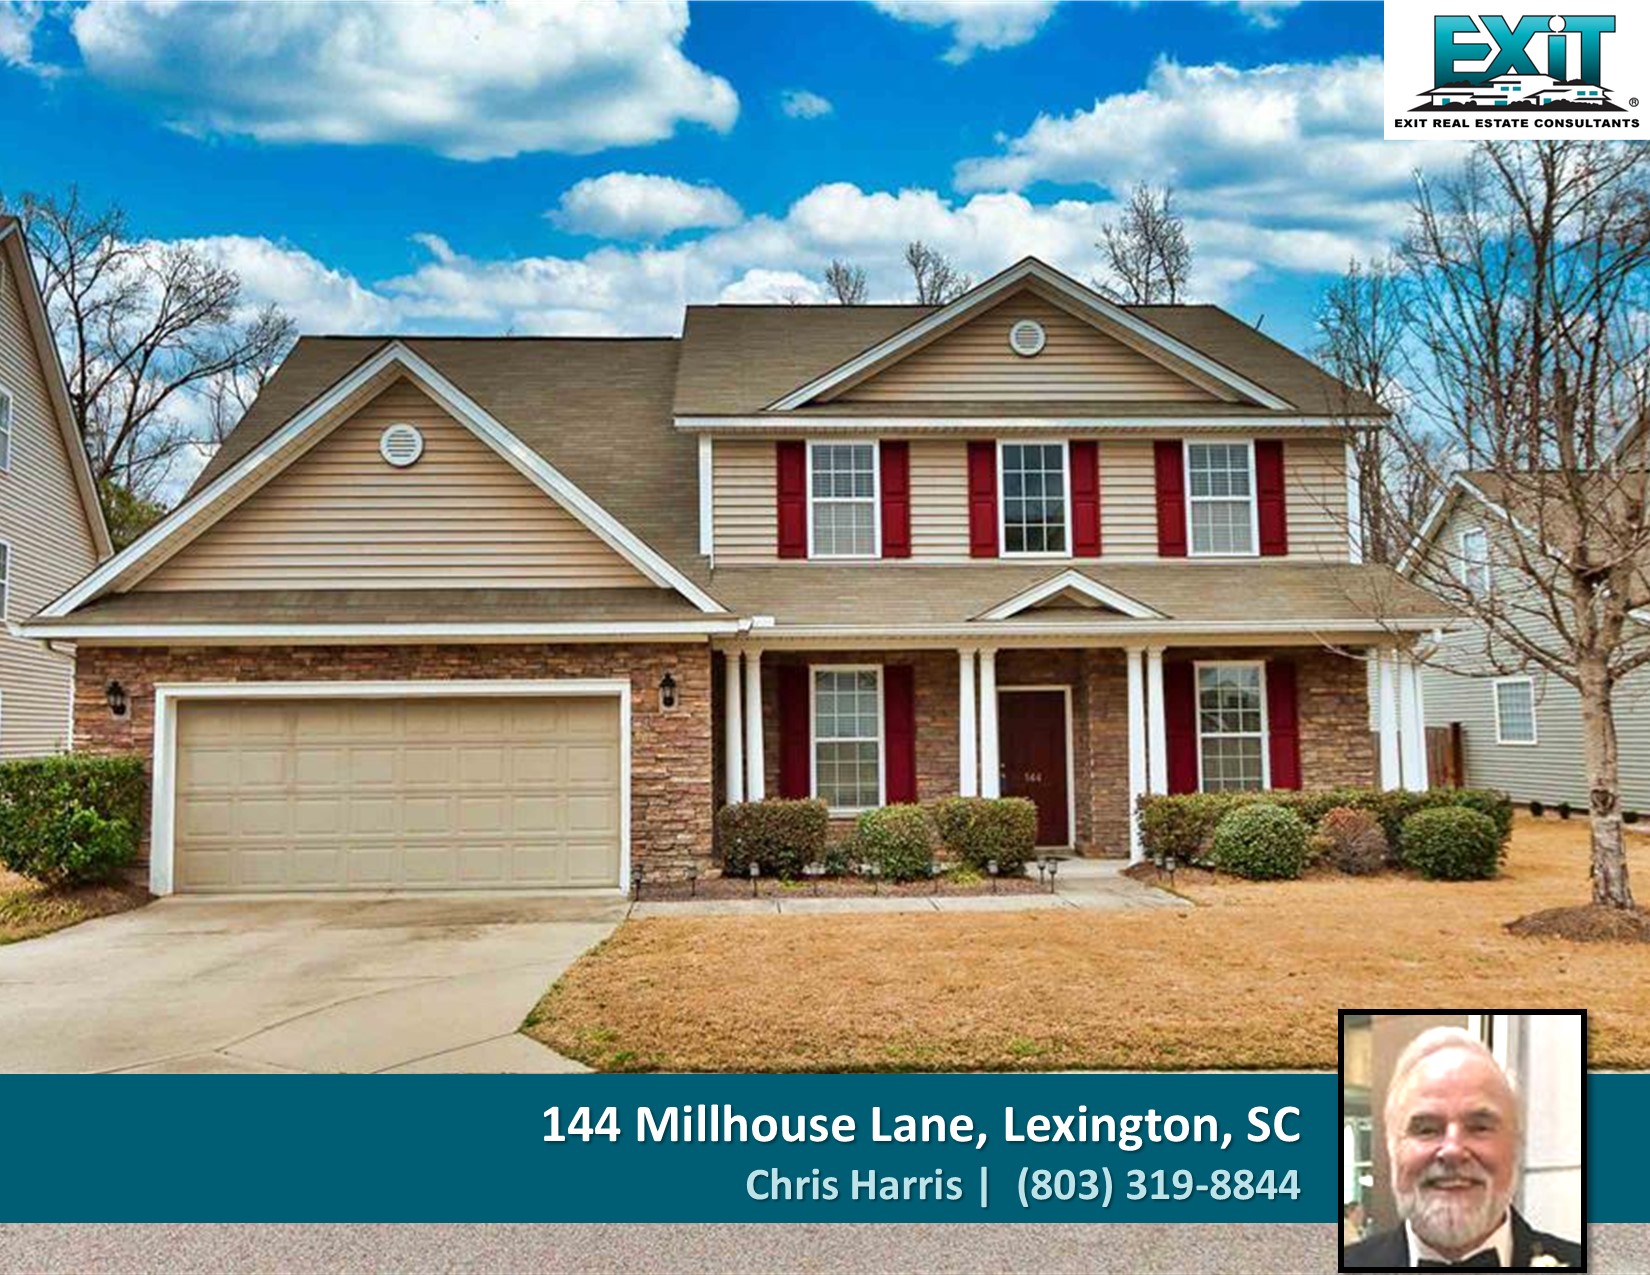 Just listed in The Mill